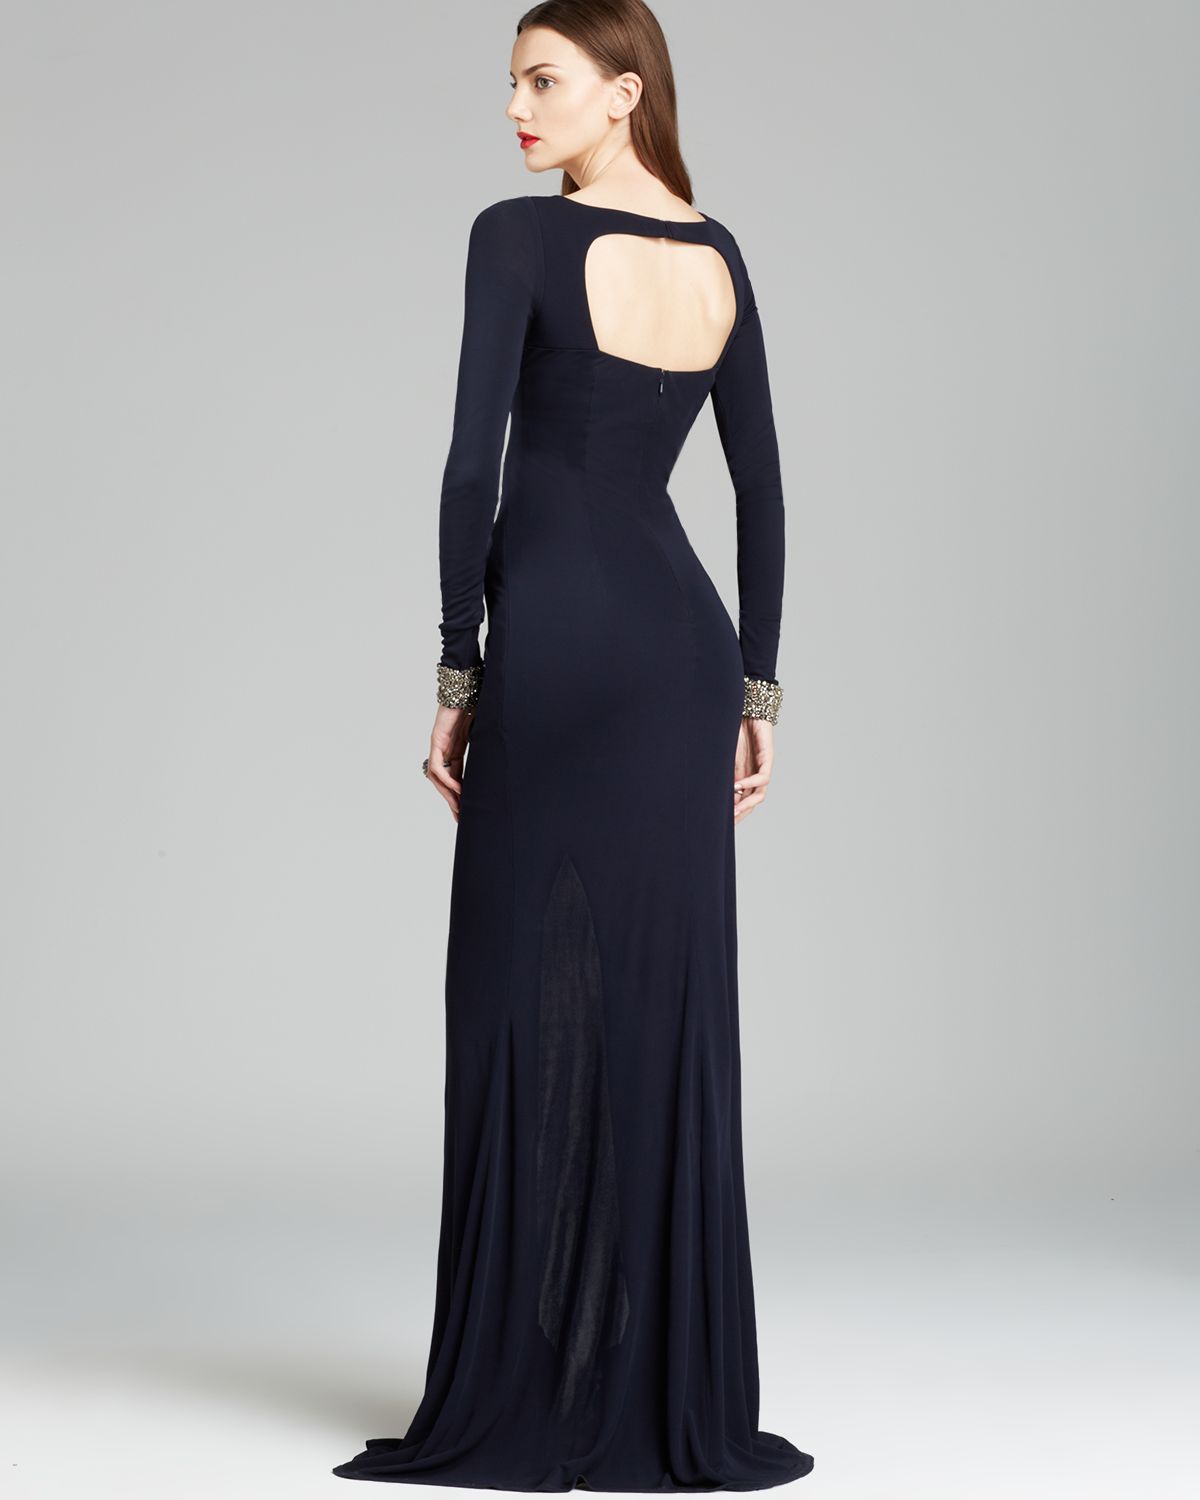 Lyst - David Meister Jeweled Cuff Draped Jersey Gown Cutout Back in Blue